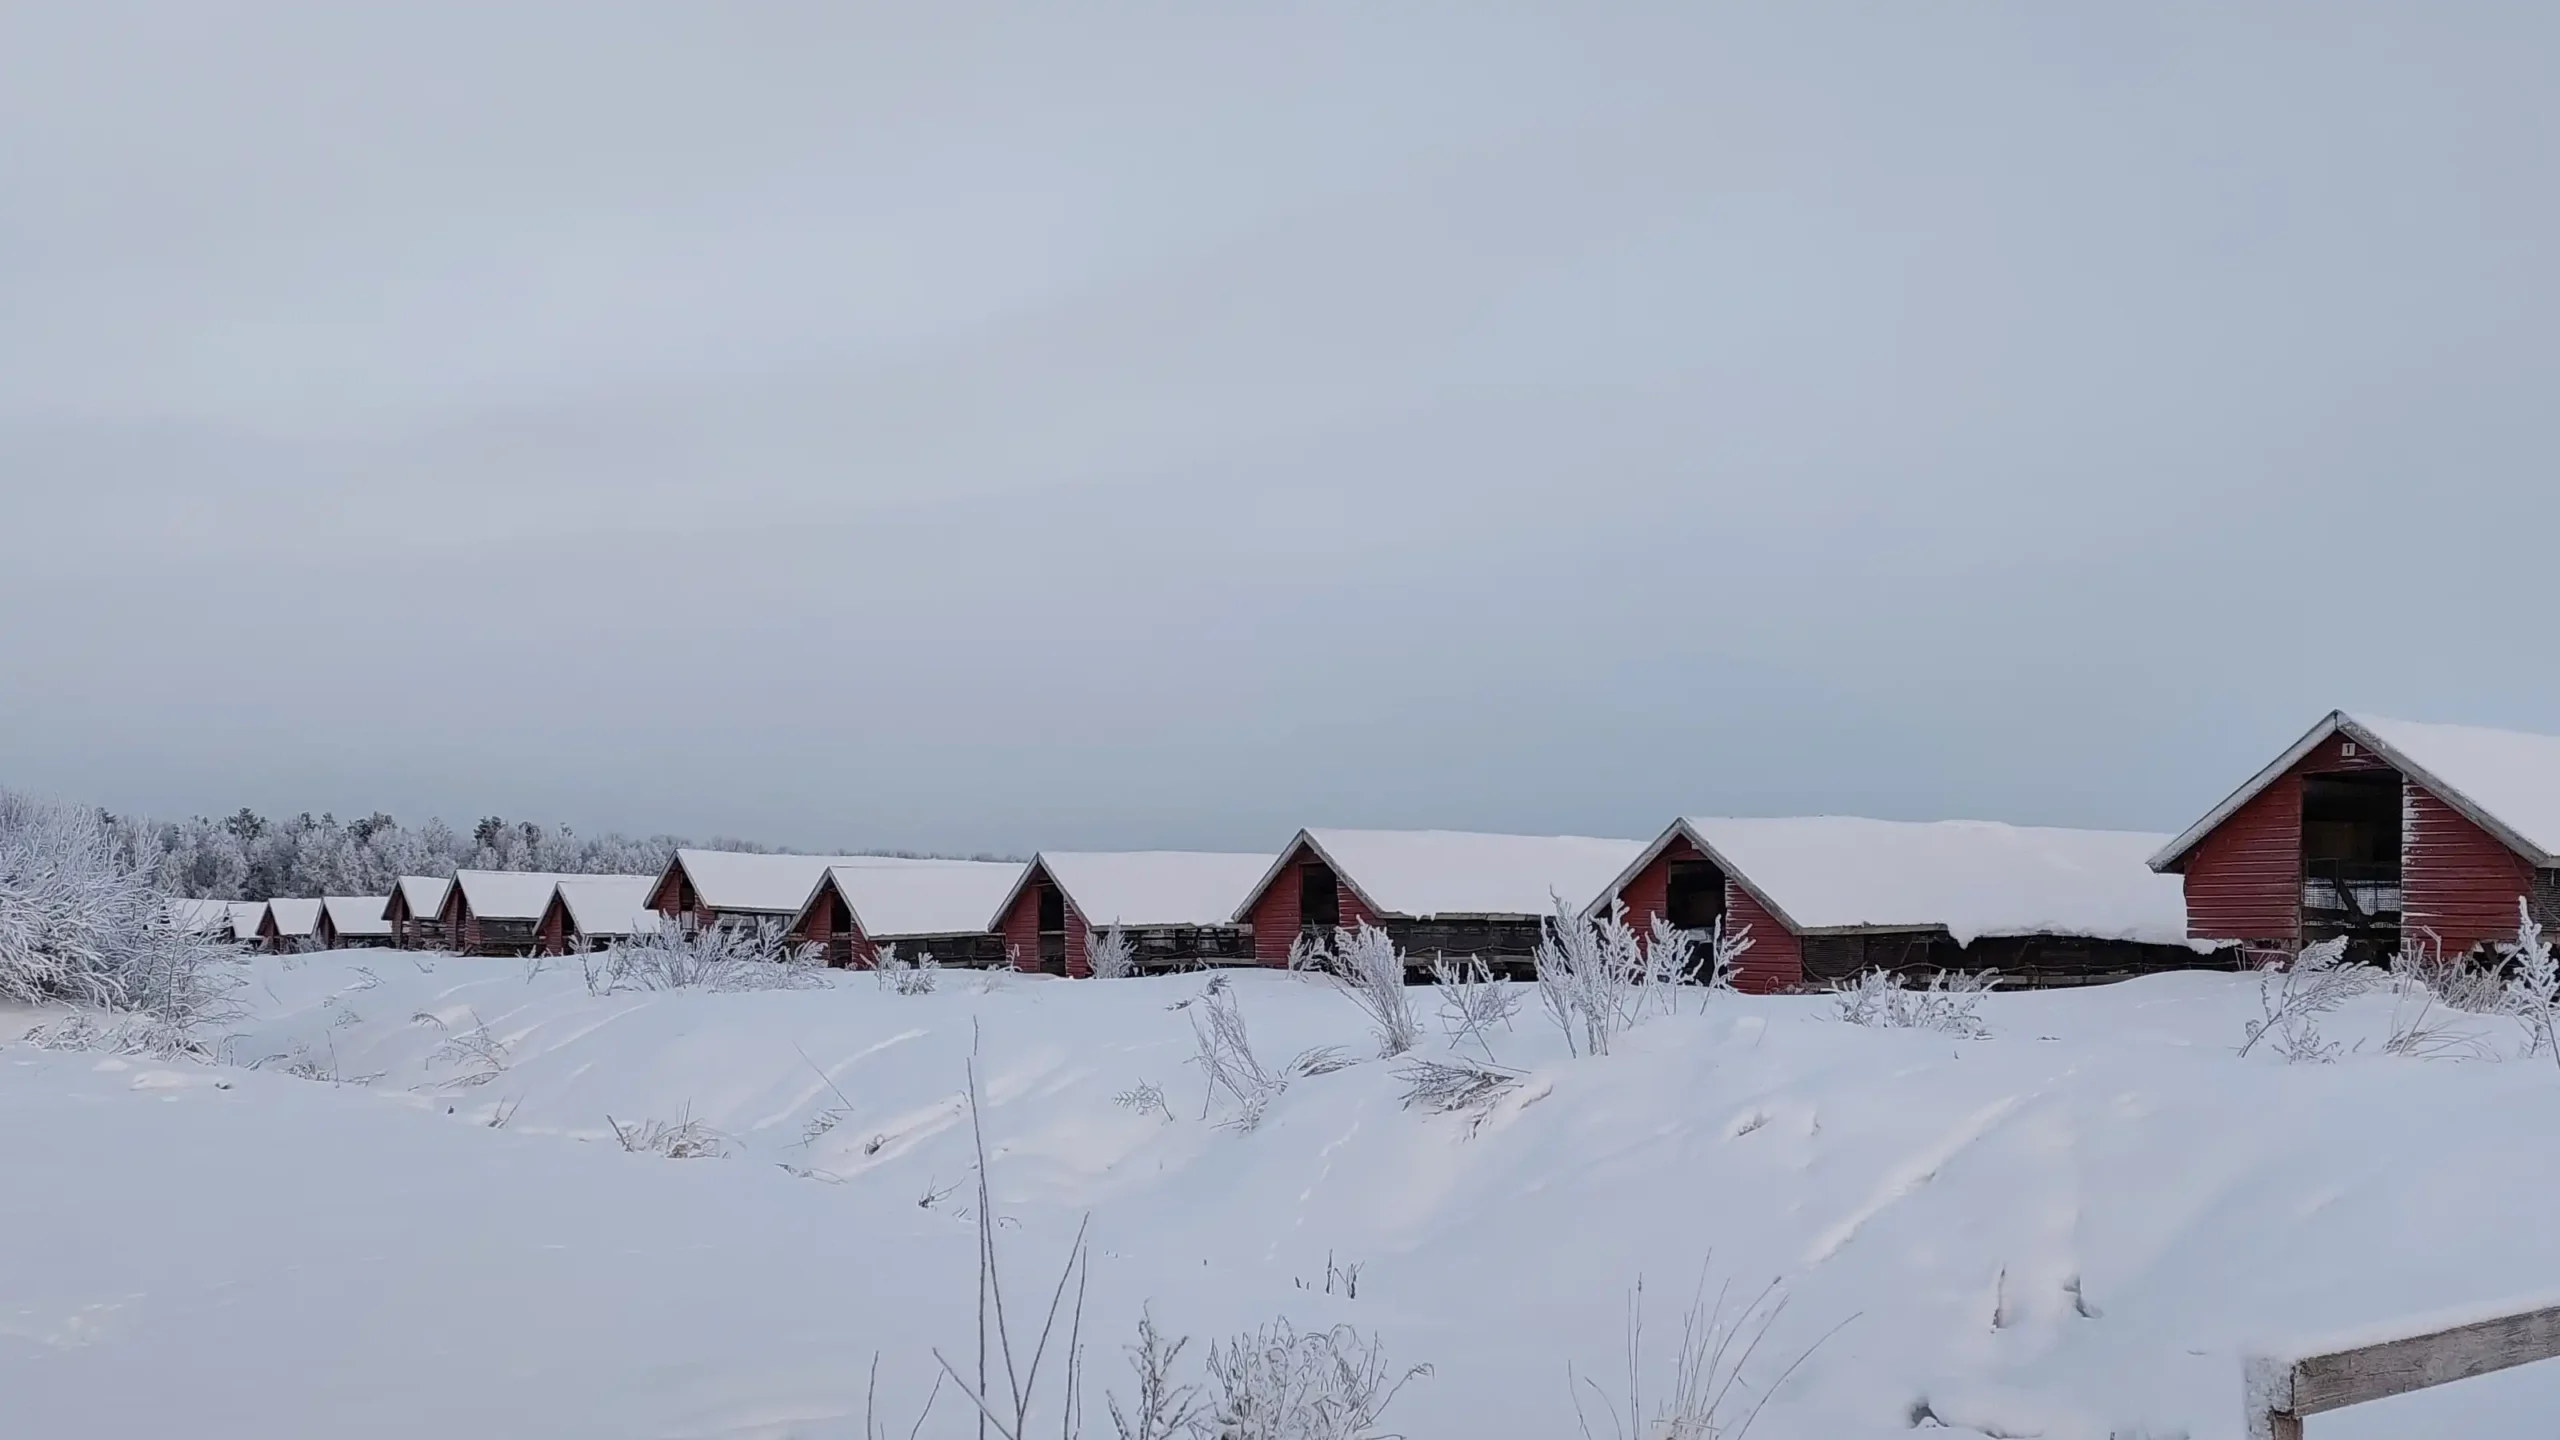 Fur farm sheds covered in snow